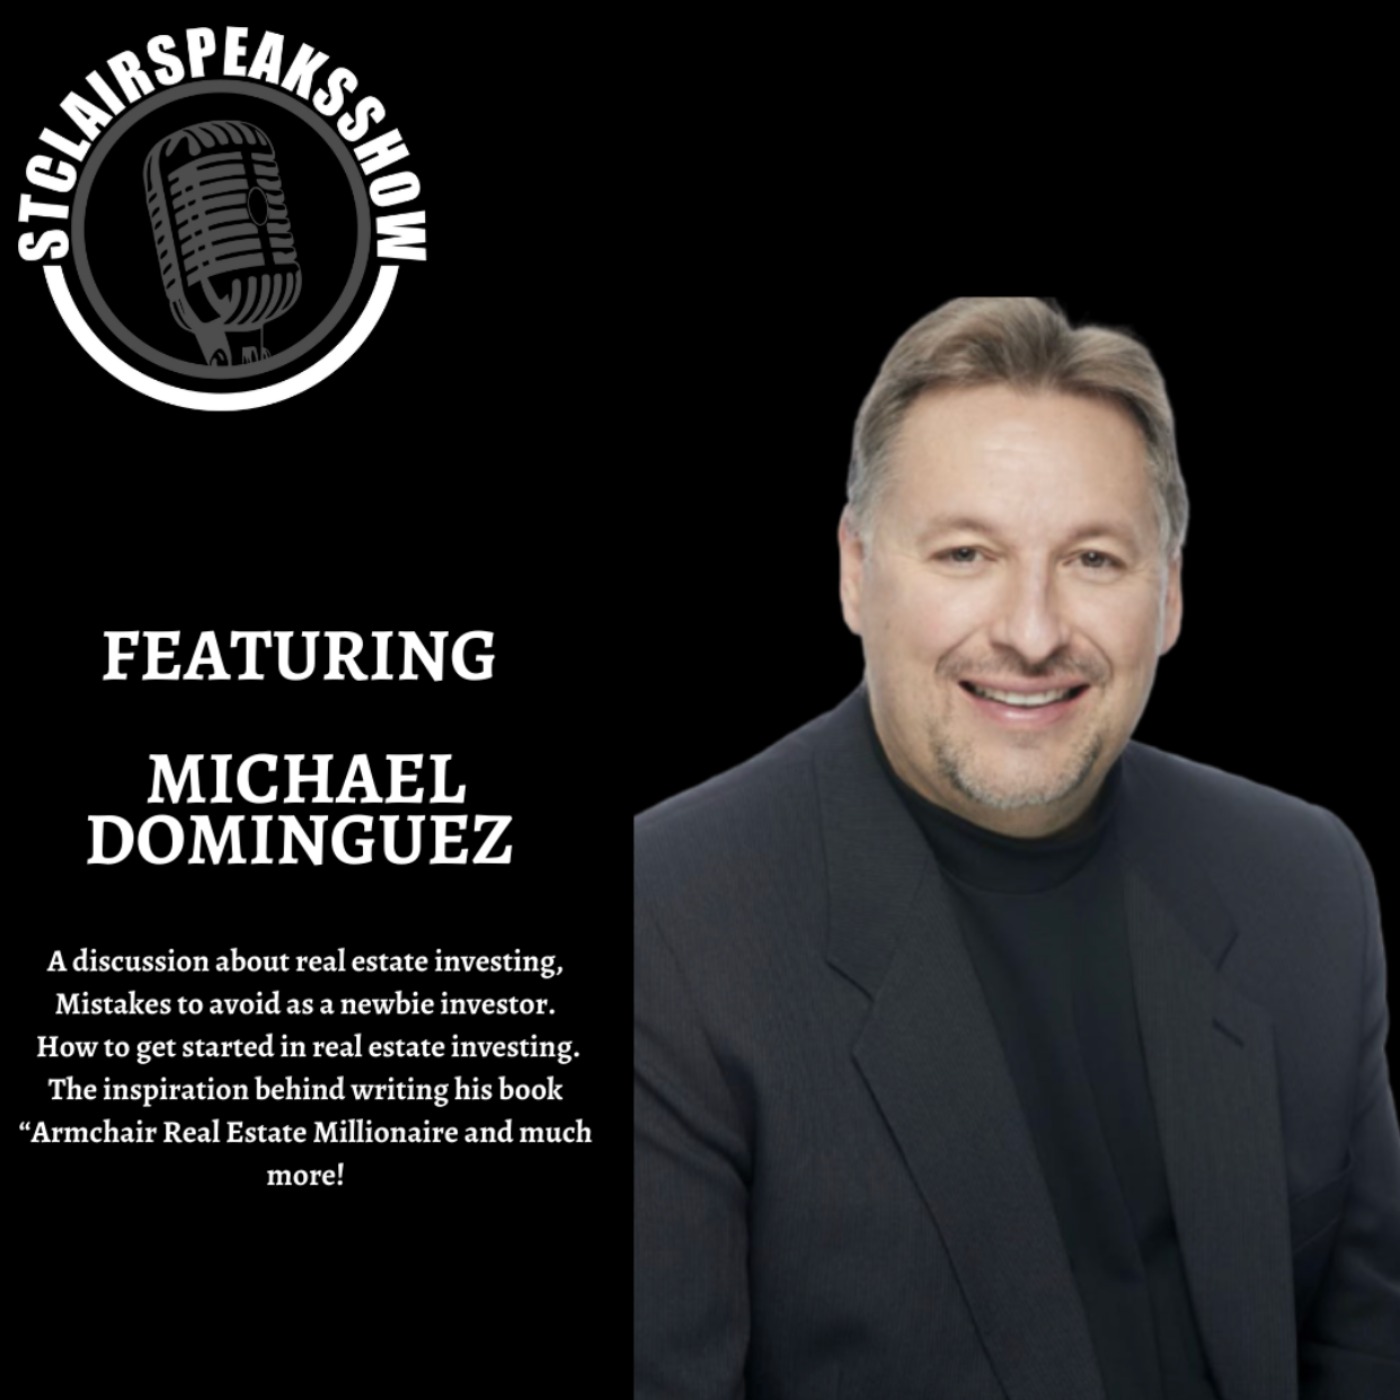 The StclairspeaksShow featuring Michael Dominguez